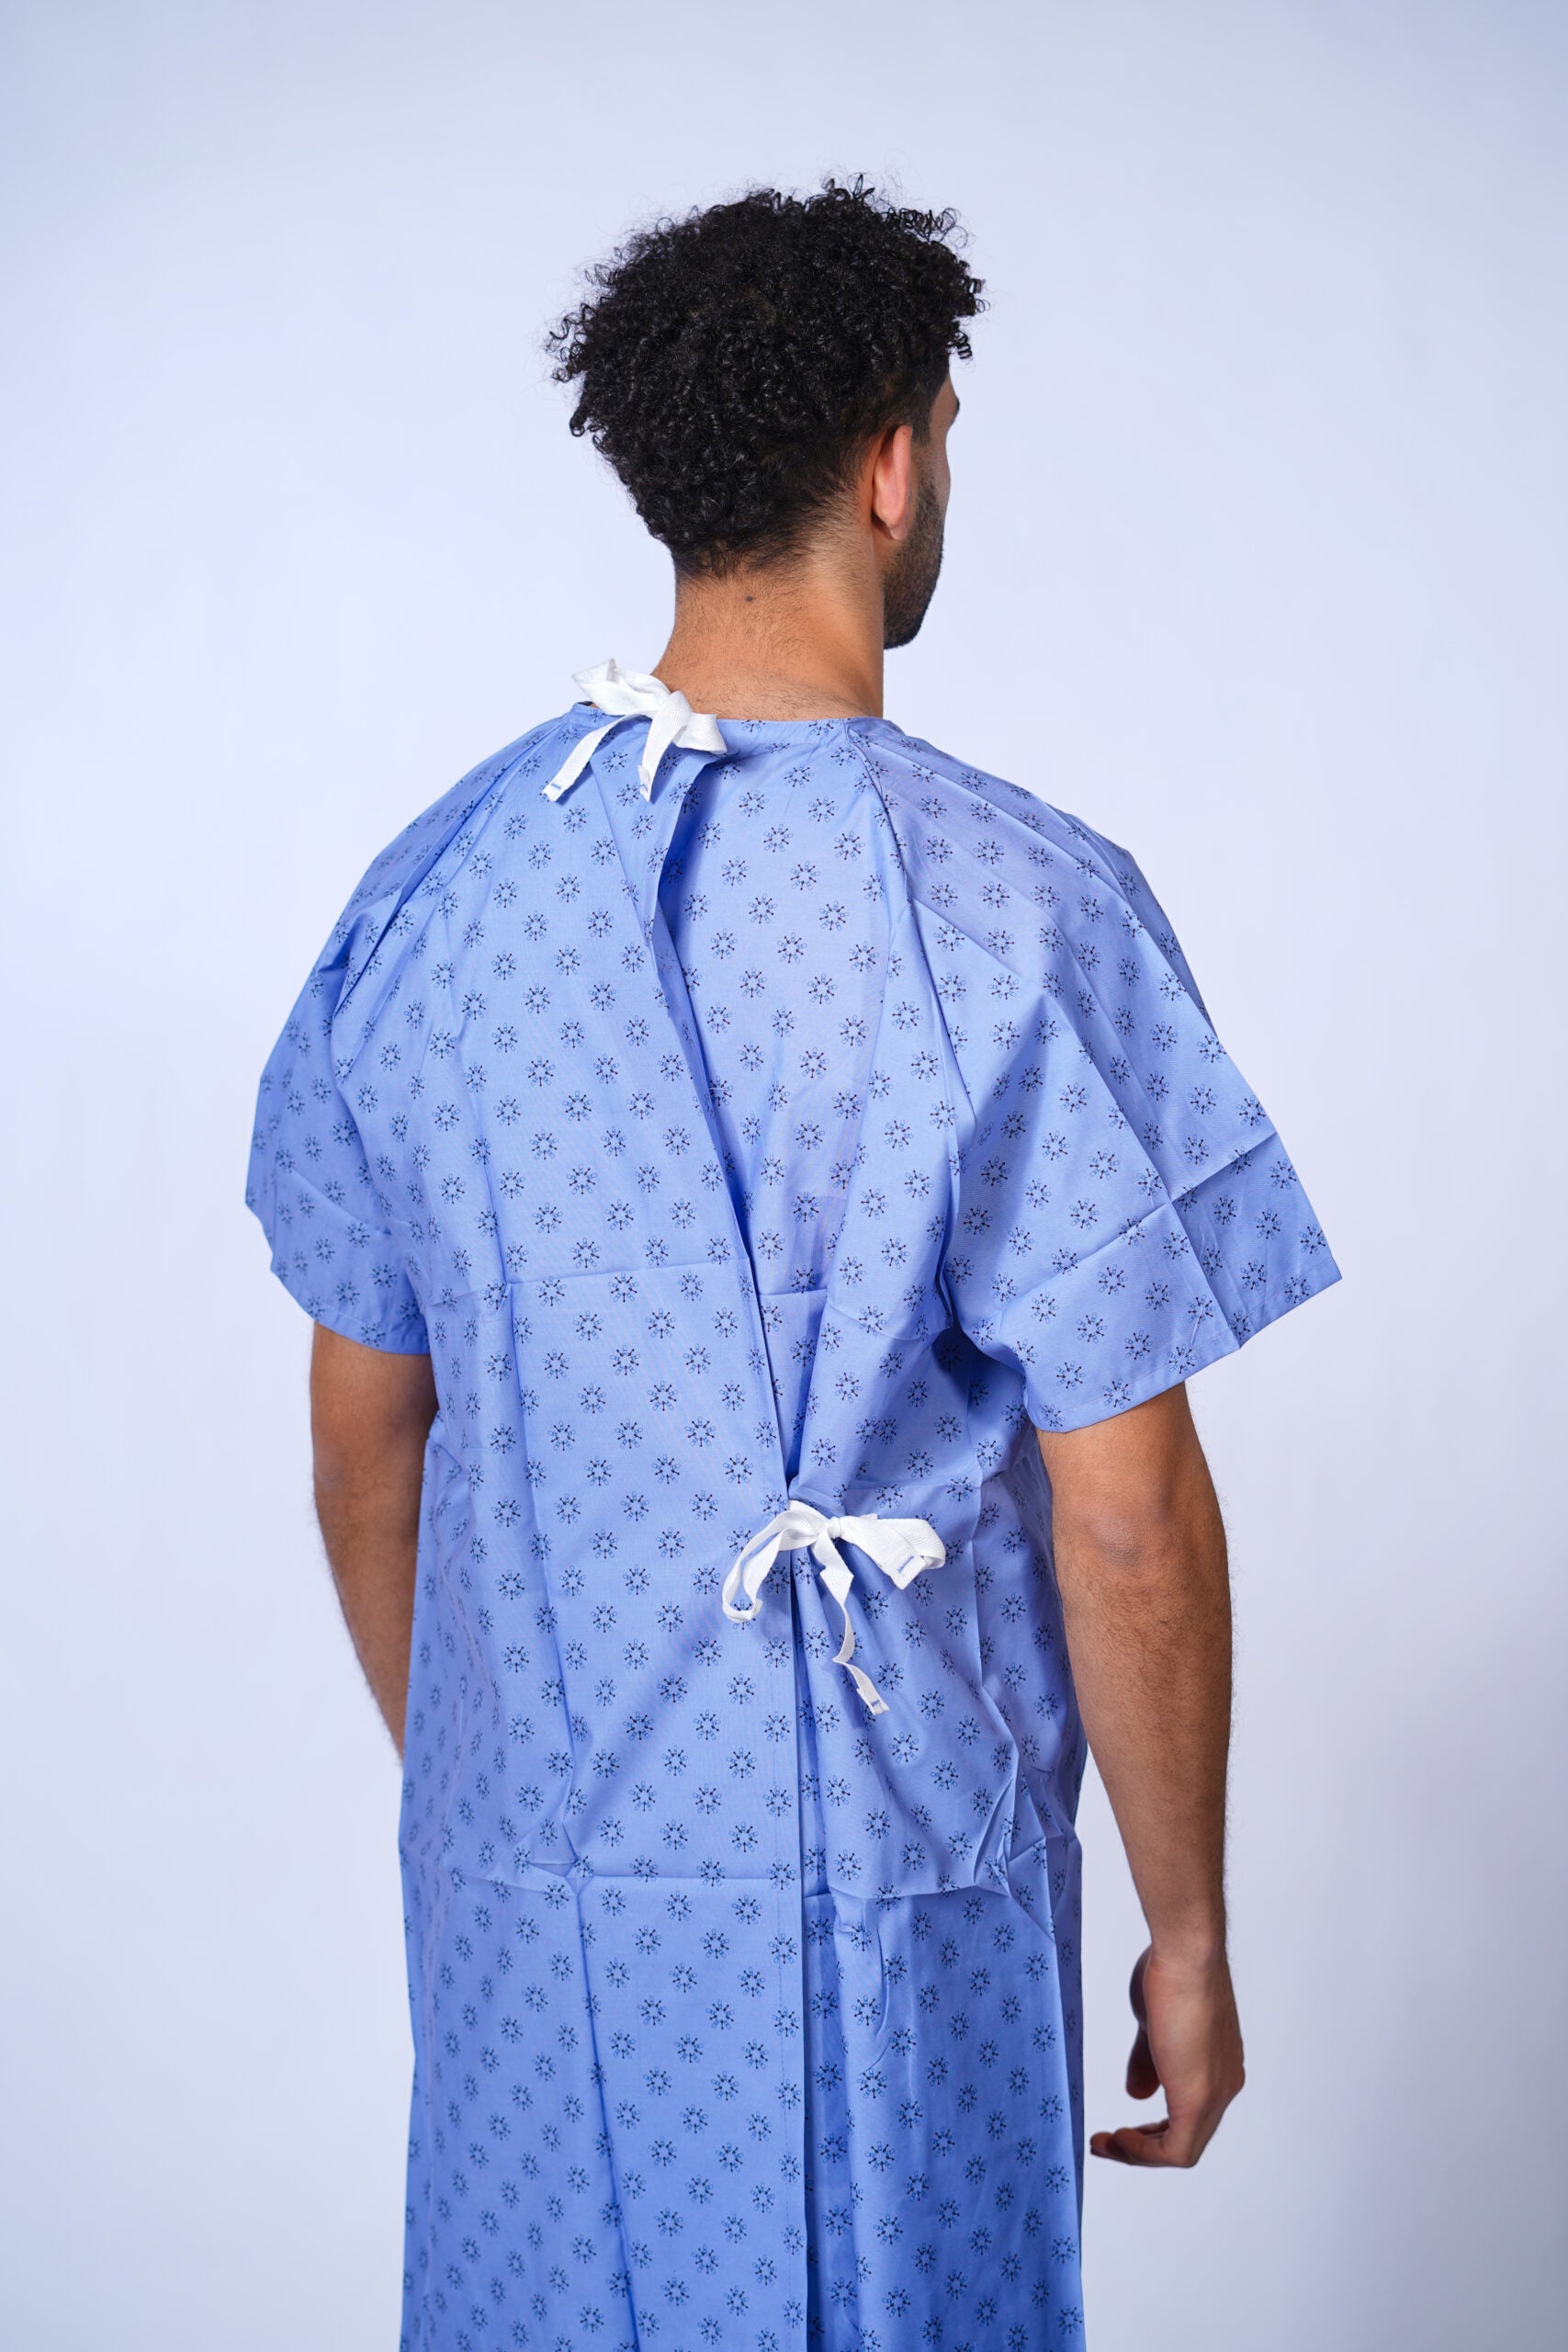 White IV Patient Gown